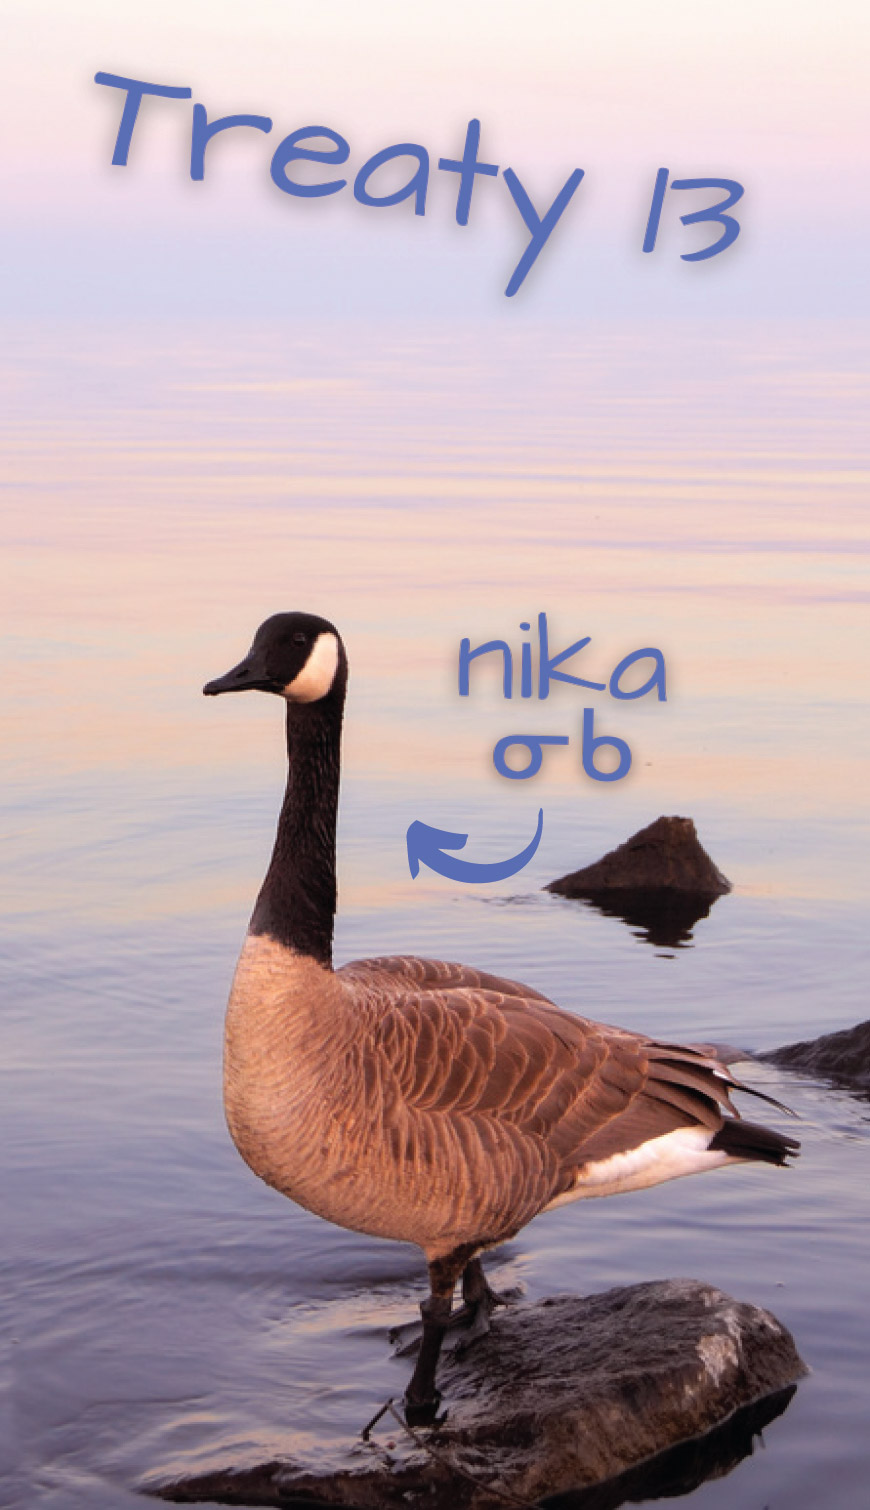 Goose Nika on the water with title Treaty 13